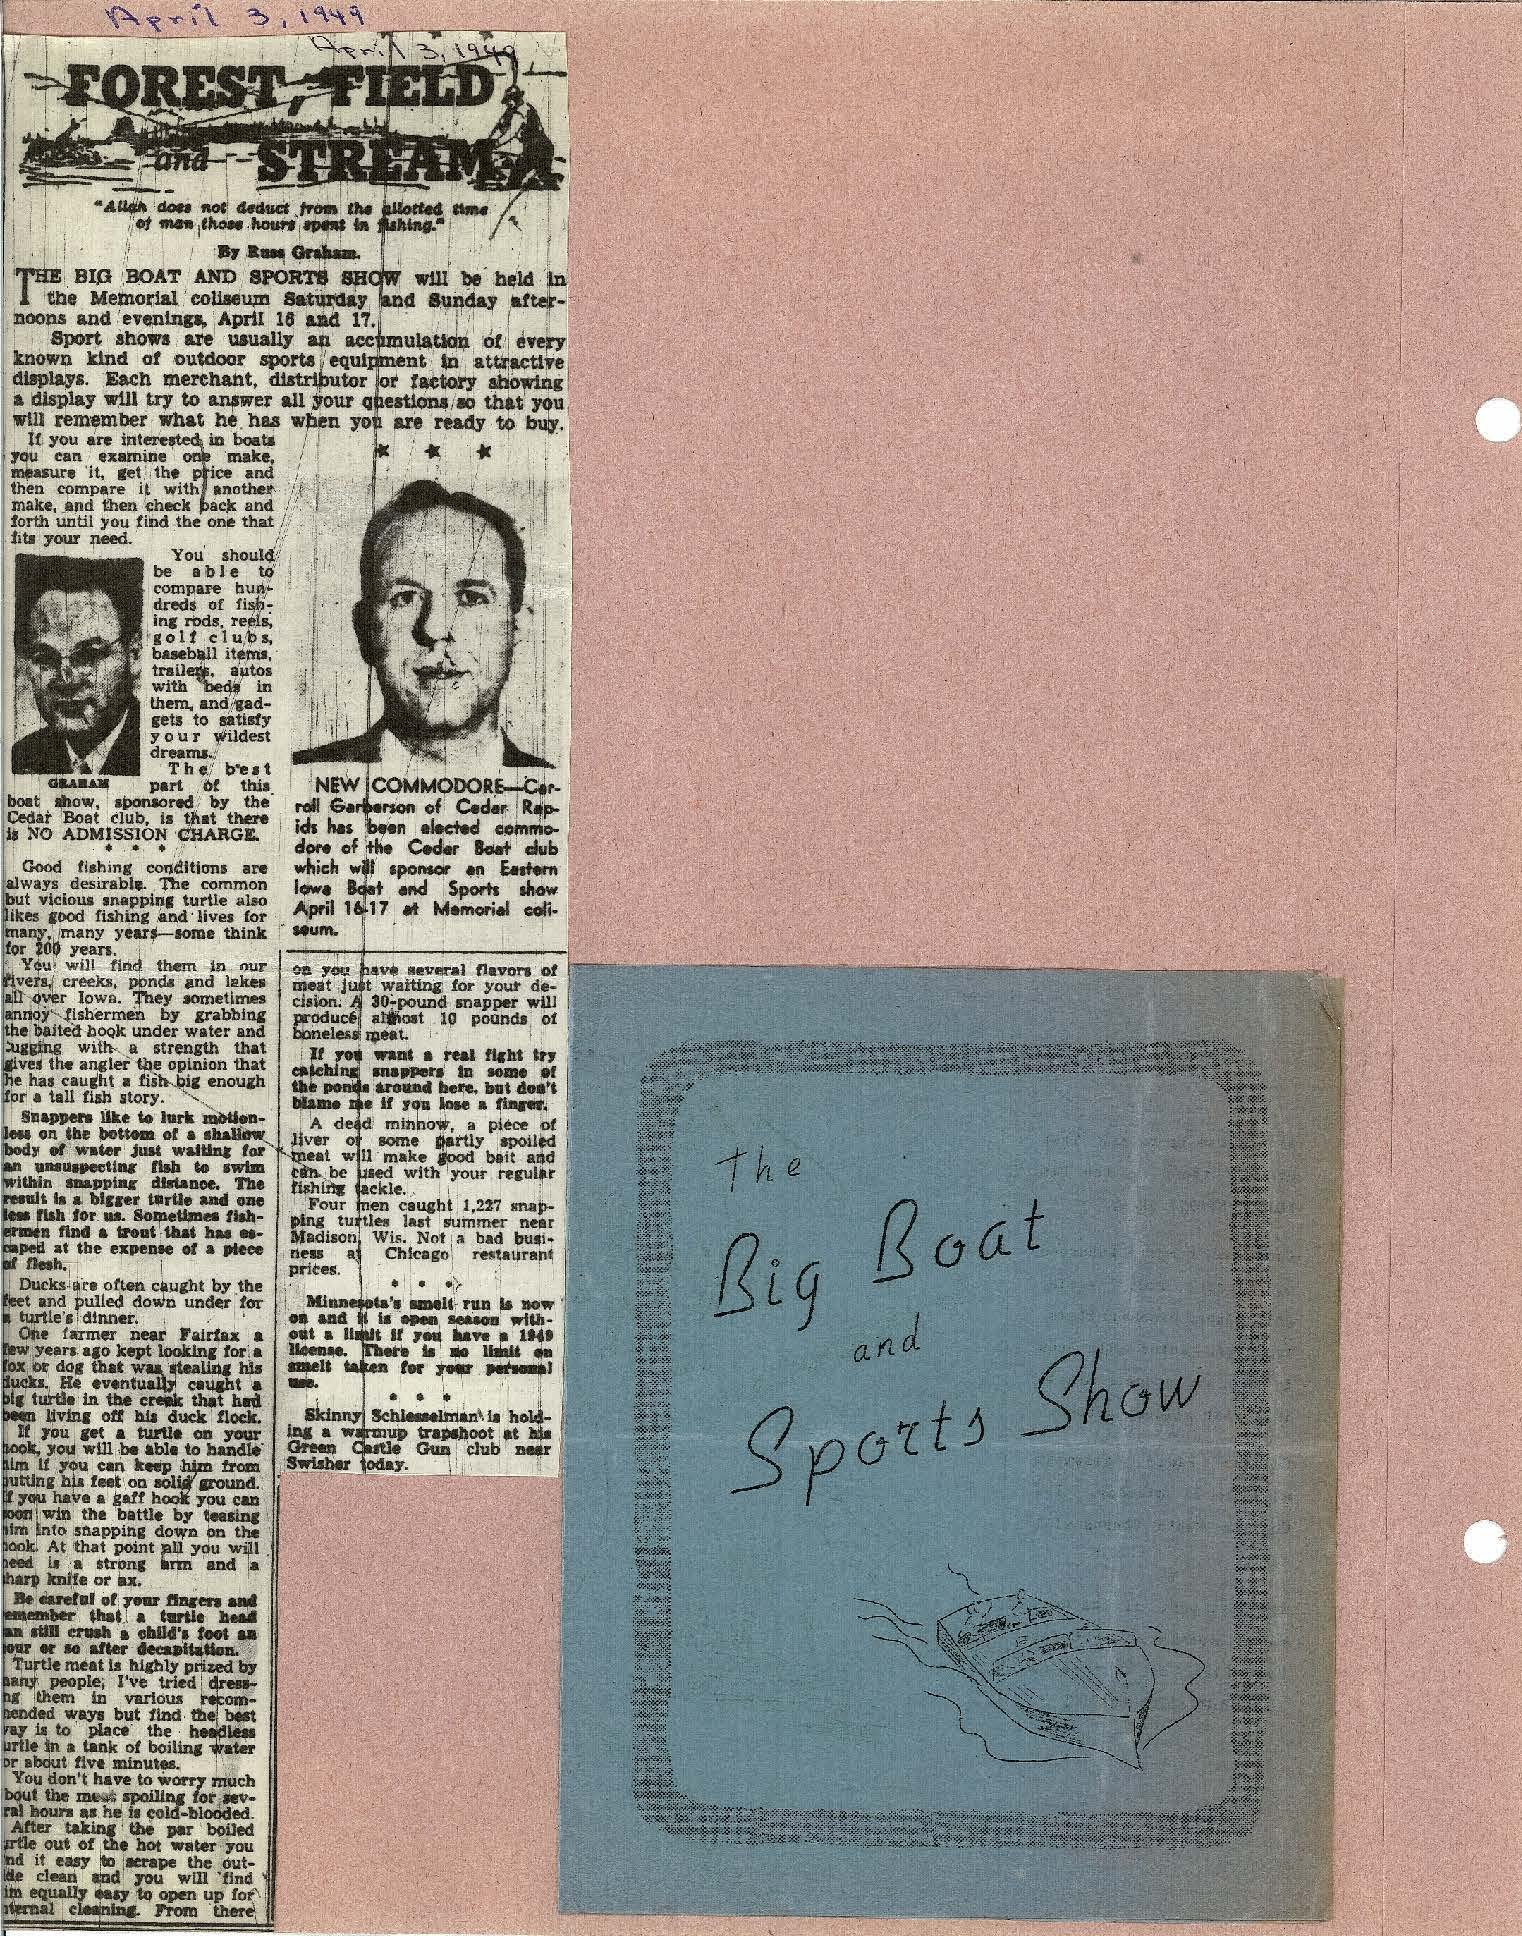 Gazette article April 3, 1948 about boat and sport show and announcing Carrol Garberson as new Commodore,